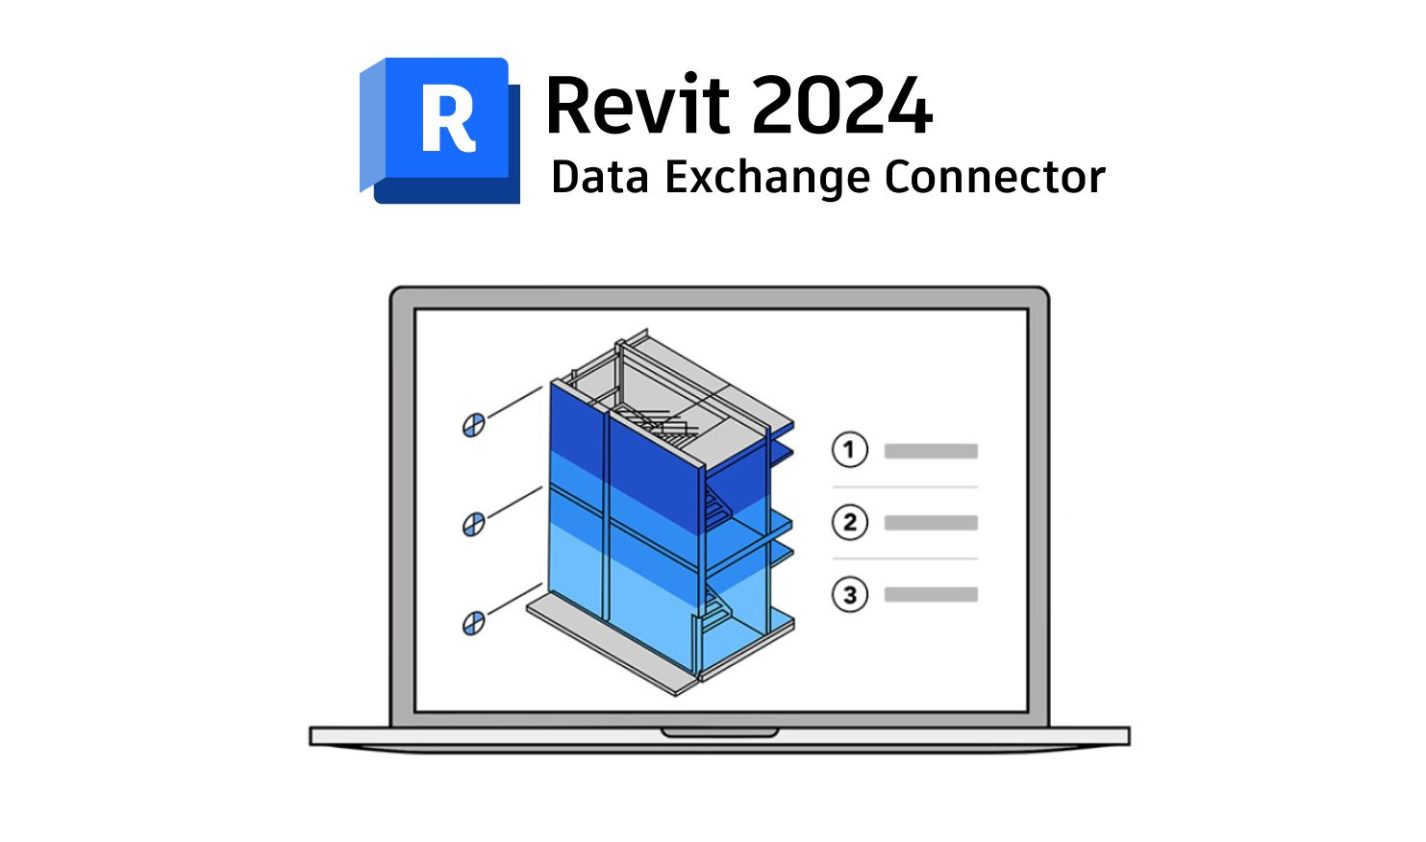 Introducing the Data Exchange Connector for Revit 2024 Streamline